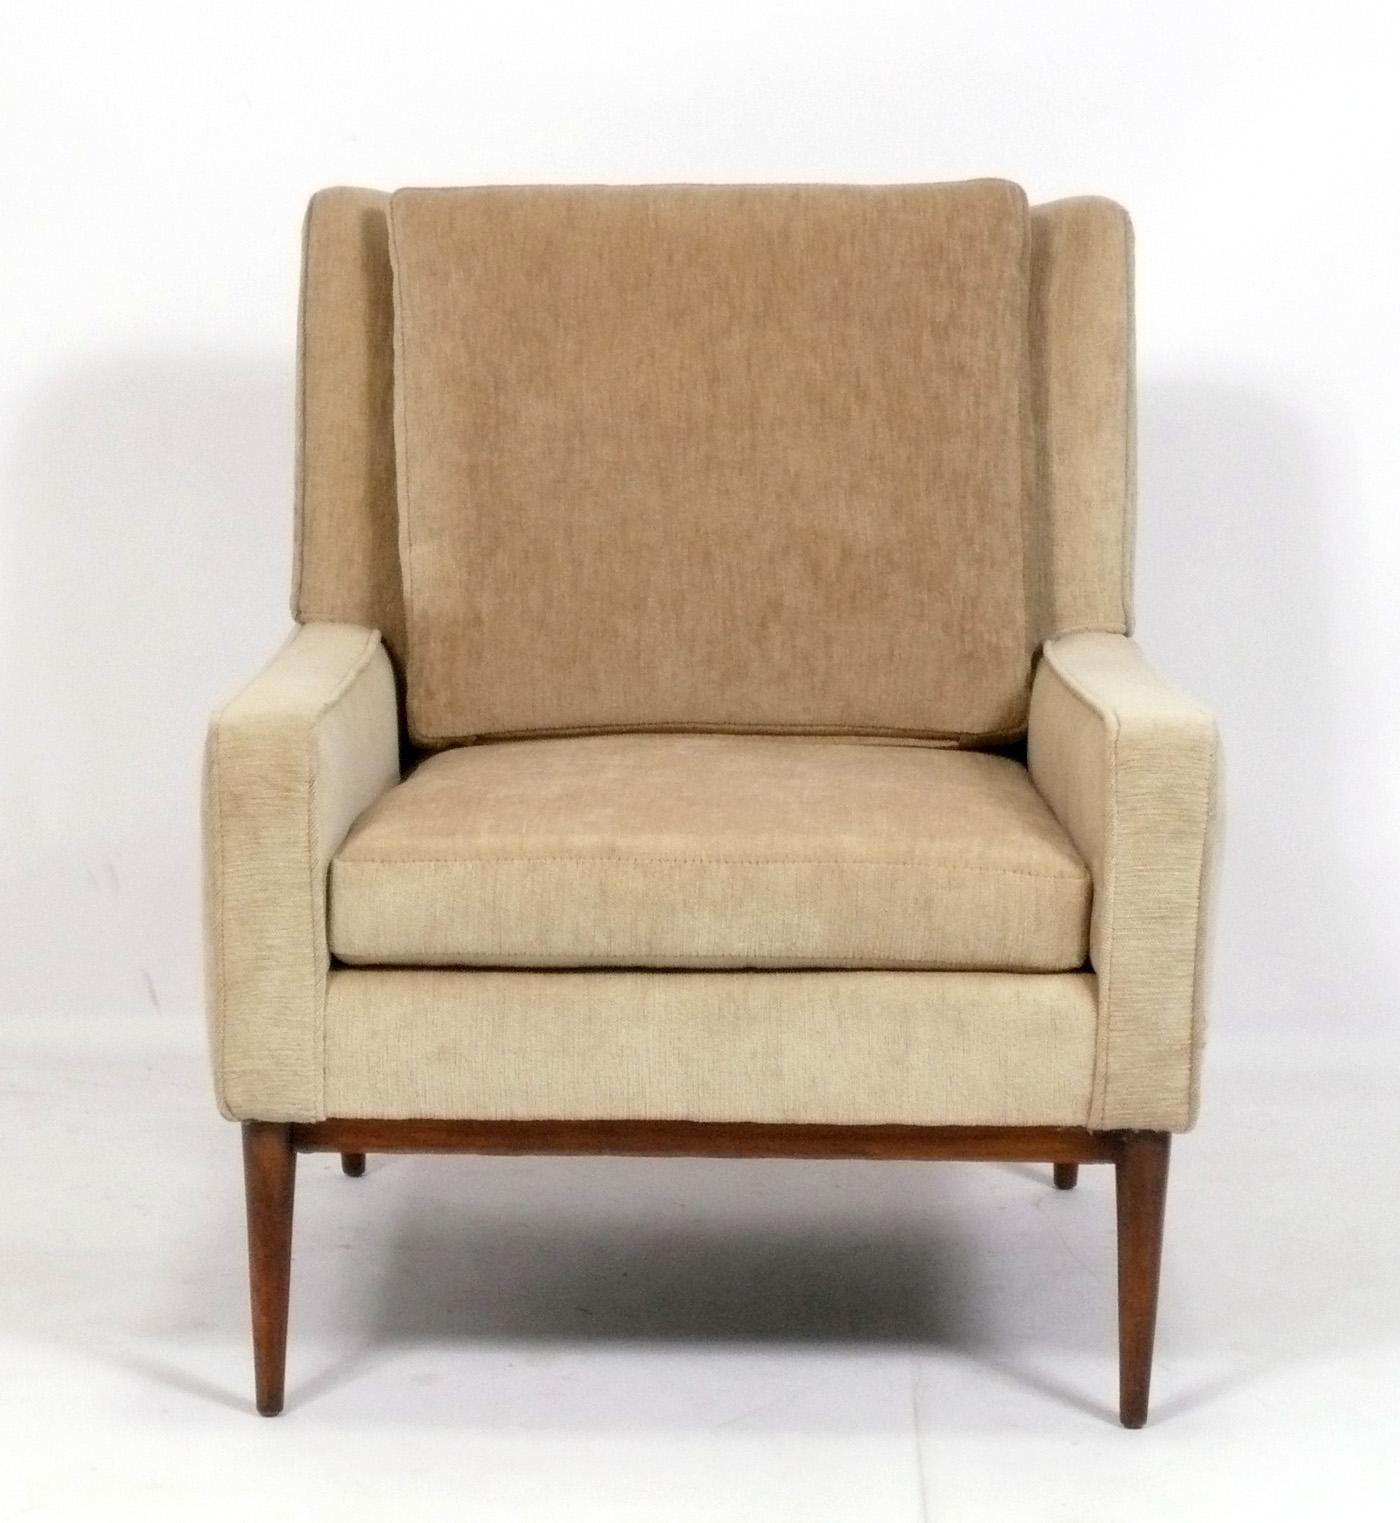 Elegant clean lined lounge chair, designed by Paul McCobb, American, circa 1950s. This chair is currently being refinished and reupholstered. You can choose the finish color, and it can be reupholstered in your fabric. Simply send us 8 yards of your